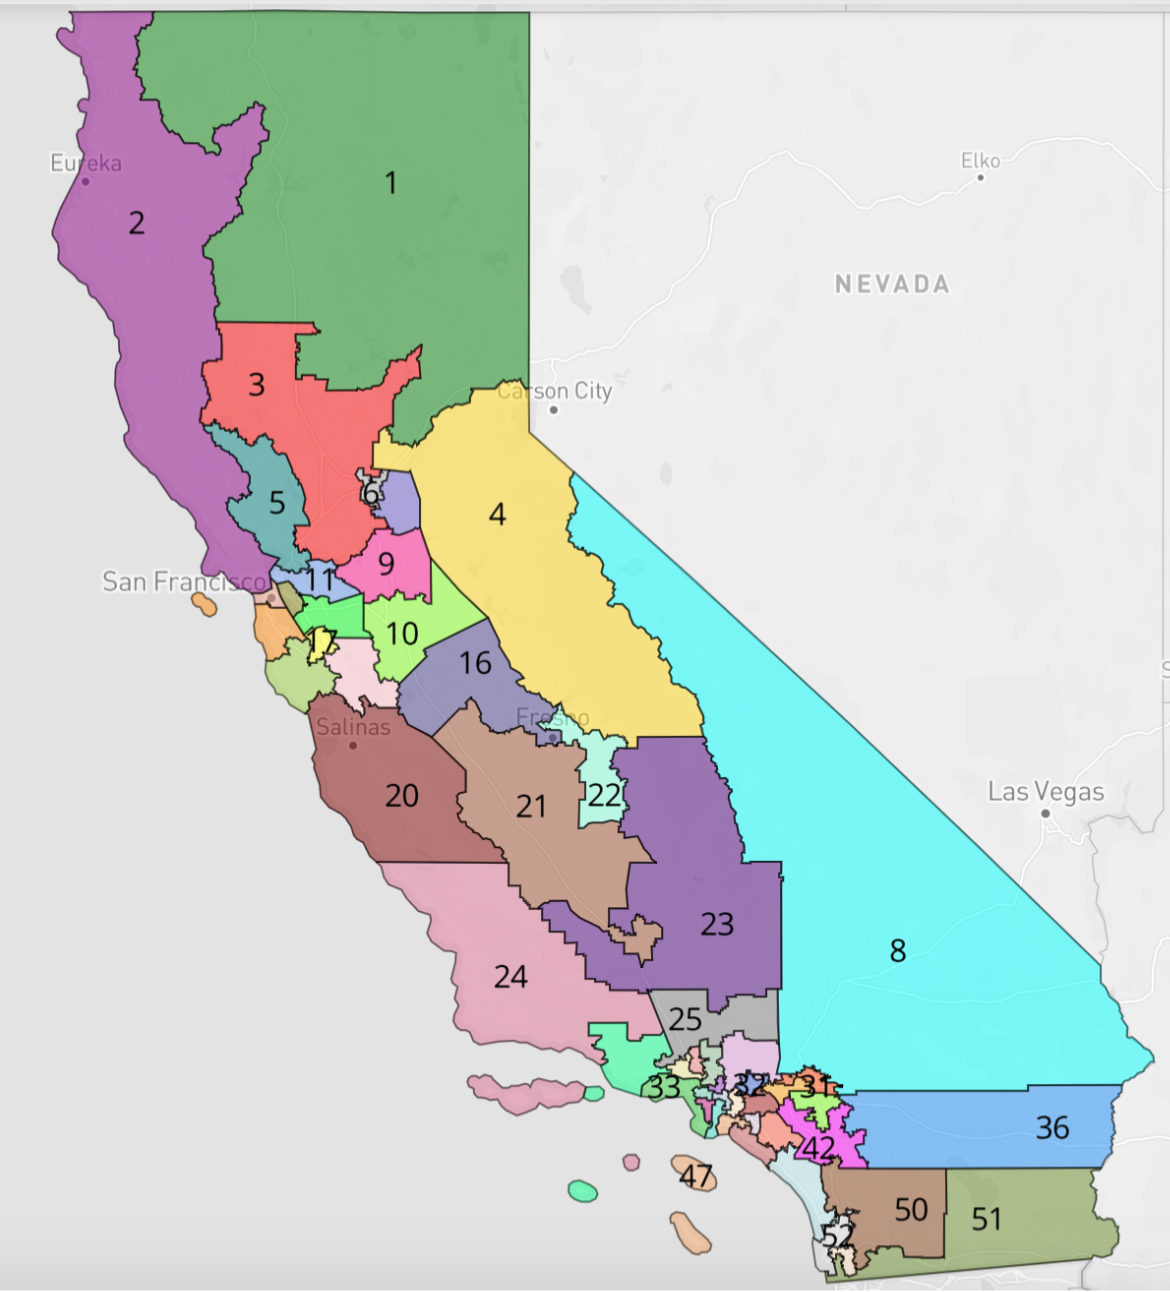 Shifting battle lines? Here's an early look at Calif. Congressional districts in 2022.